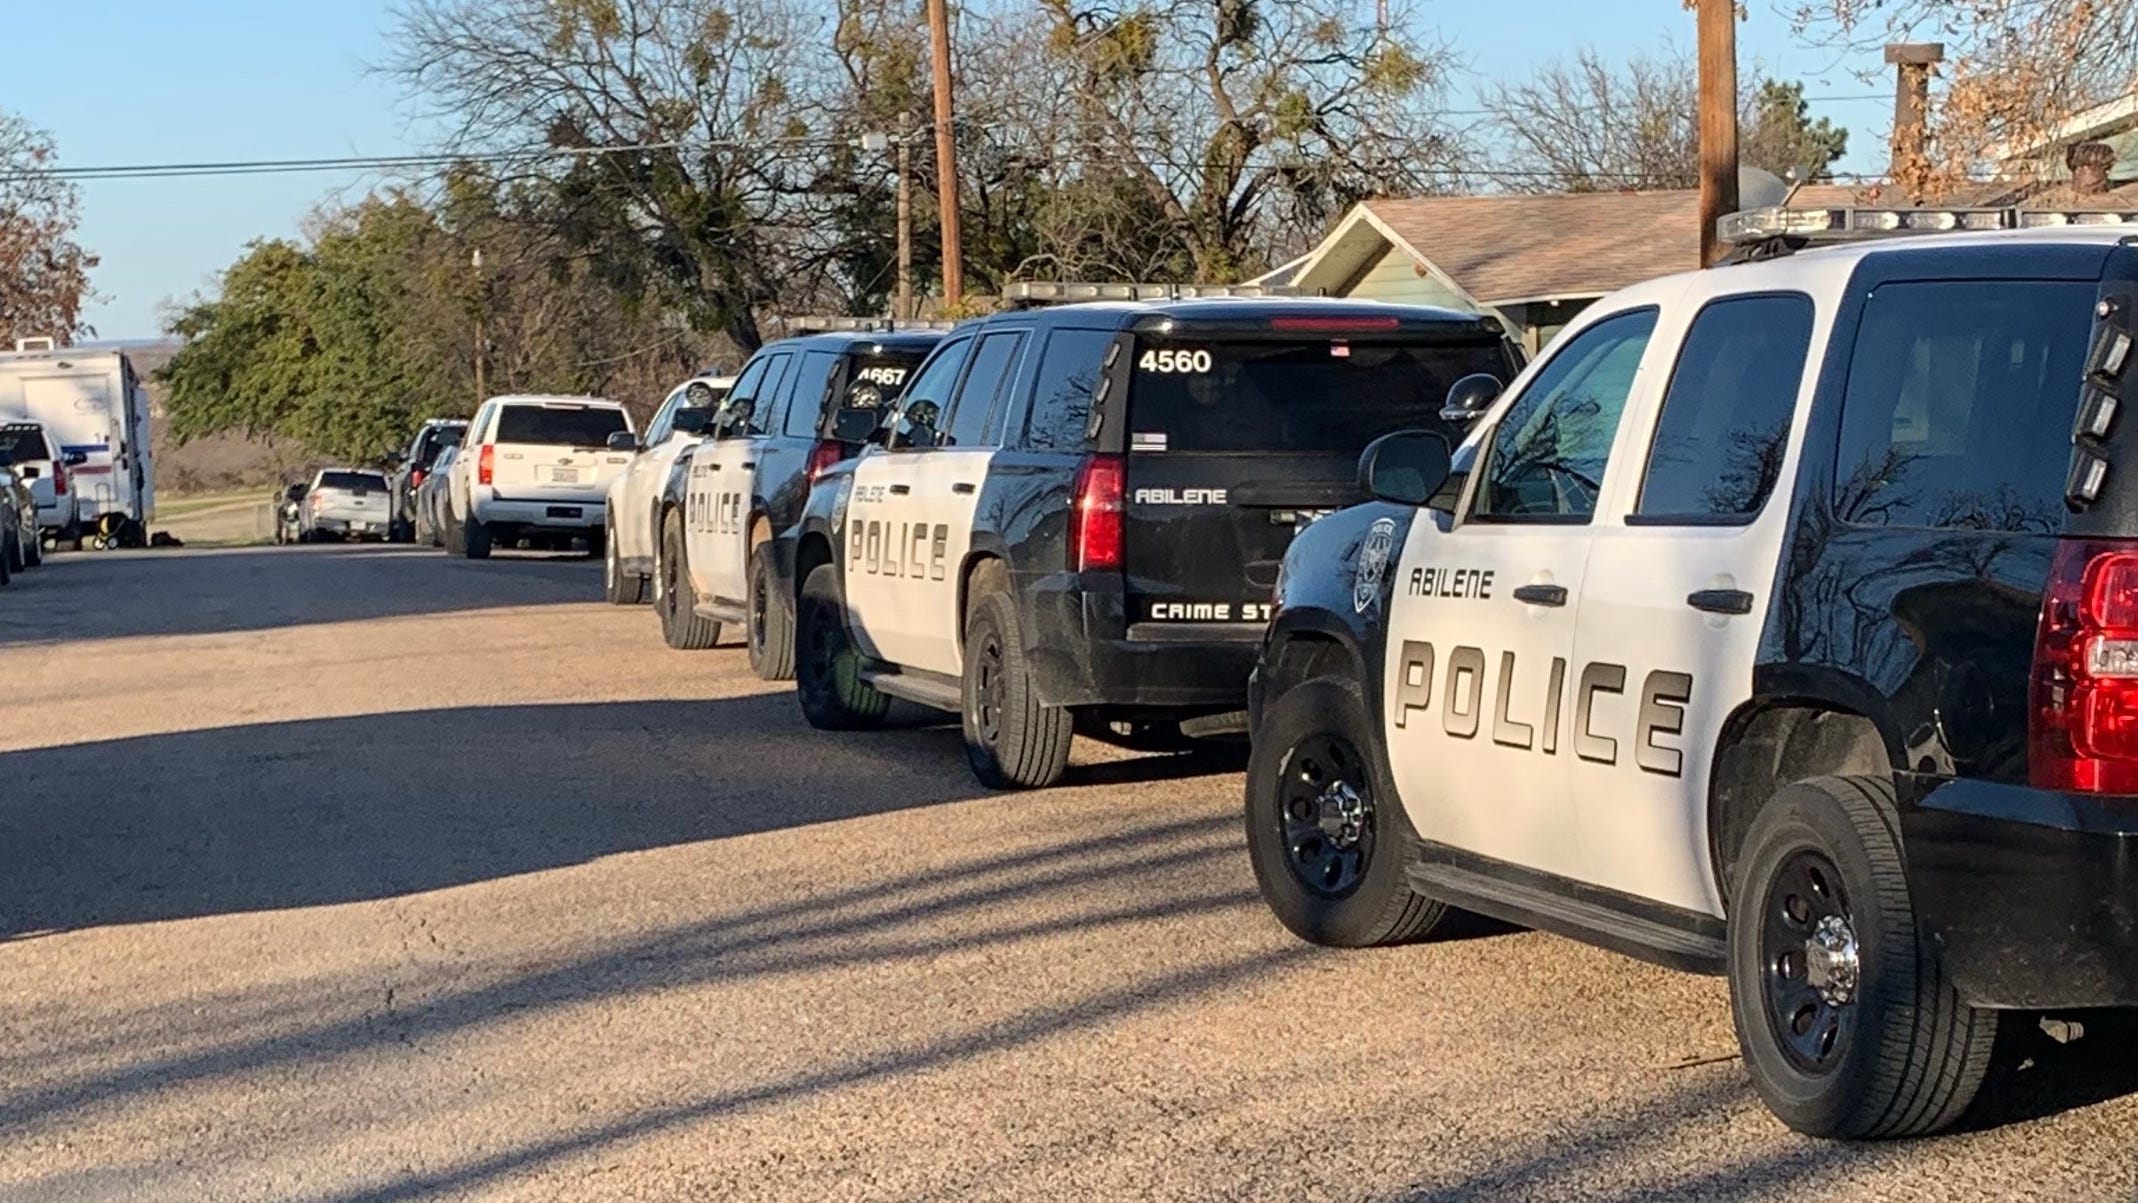  Hostage situation in Ballinger involved suicidal woman, small child 